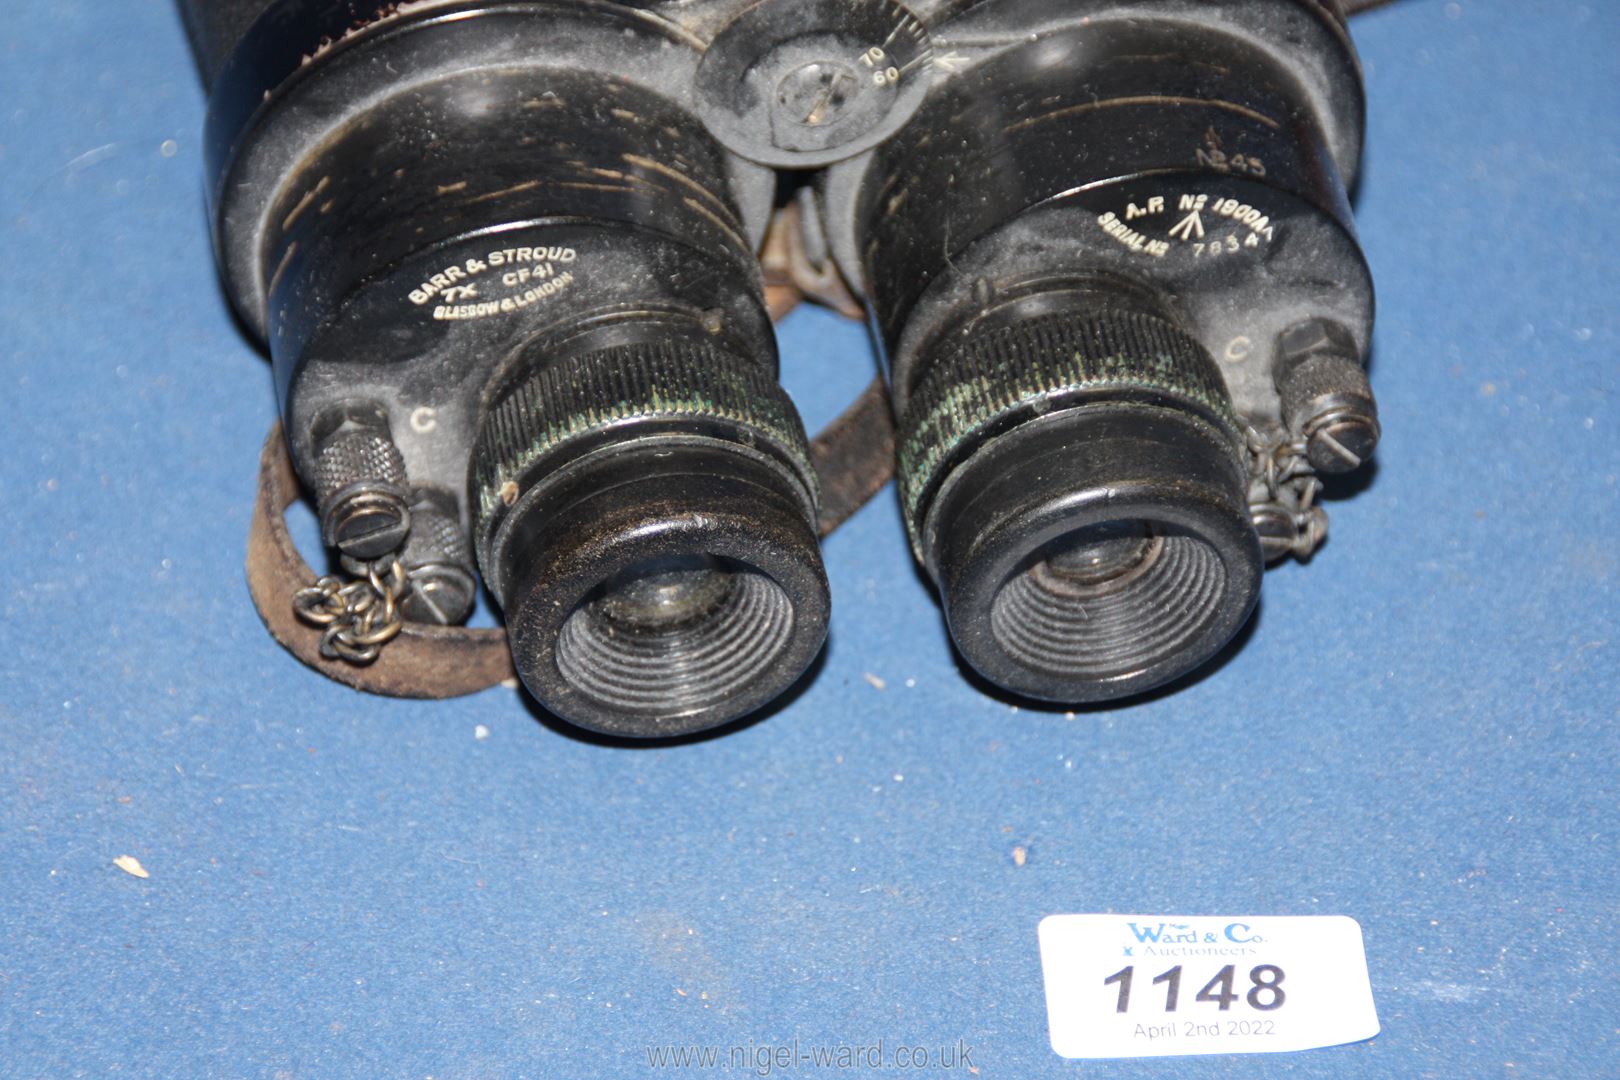 A pair of Barre Stroud Military Binoculars 7 x CF41 A.P No.1900A, serial no. - Image 2 of 2